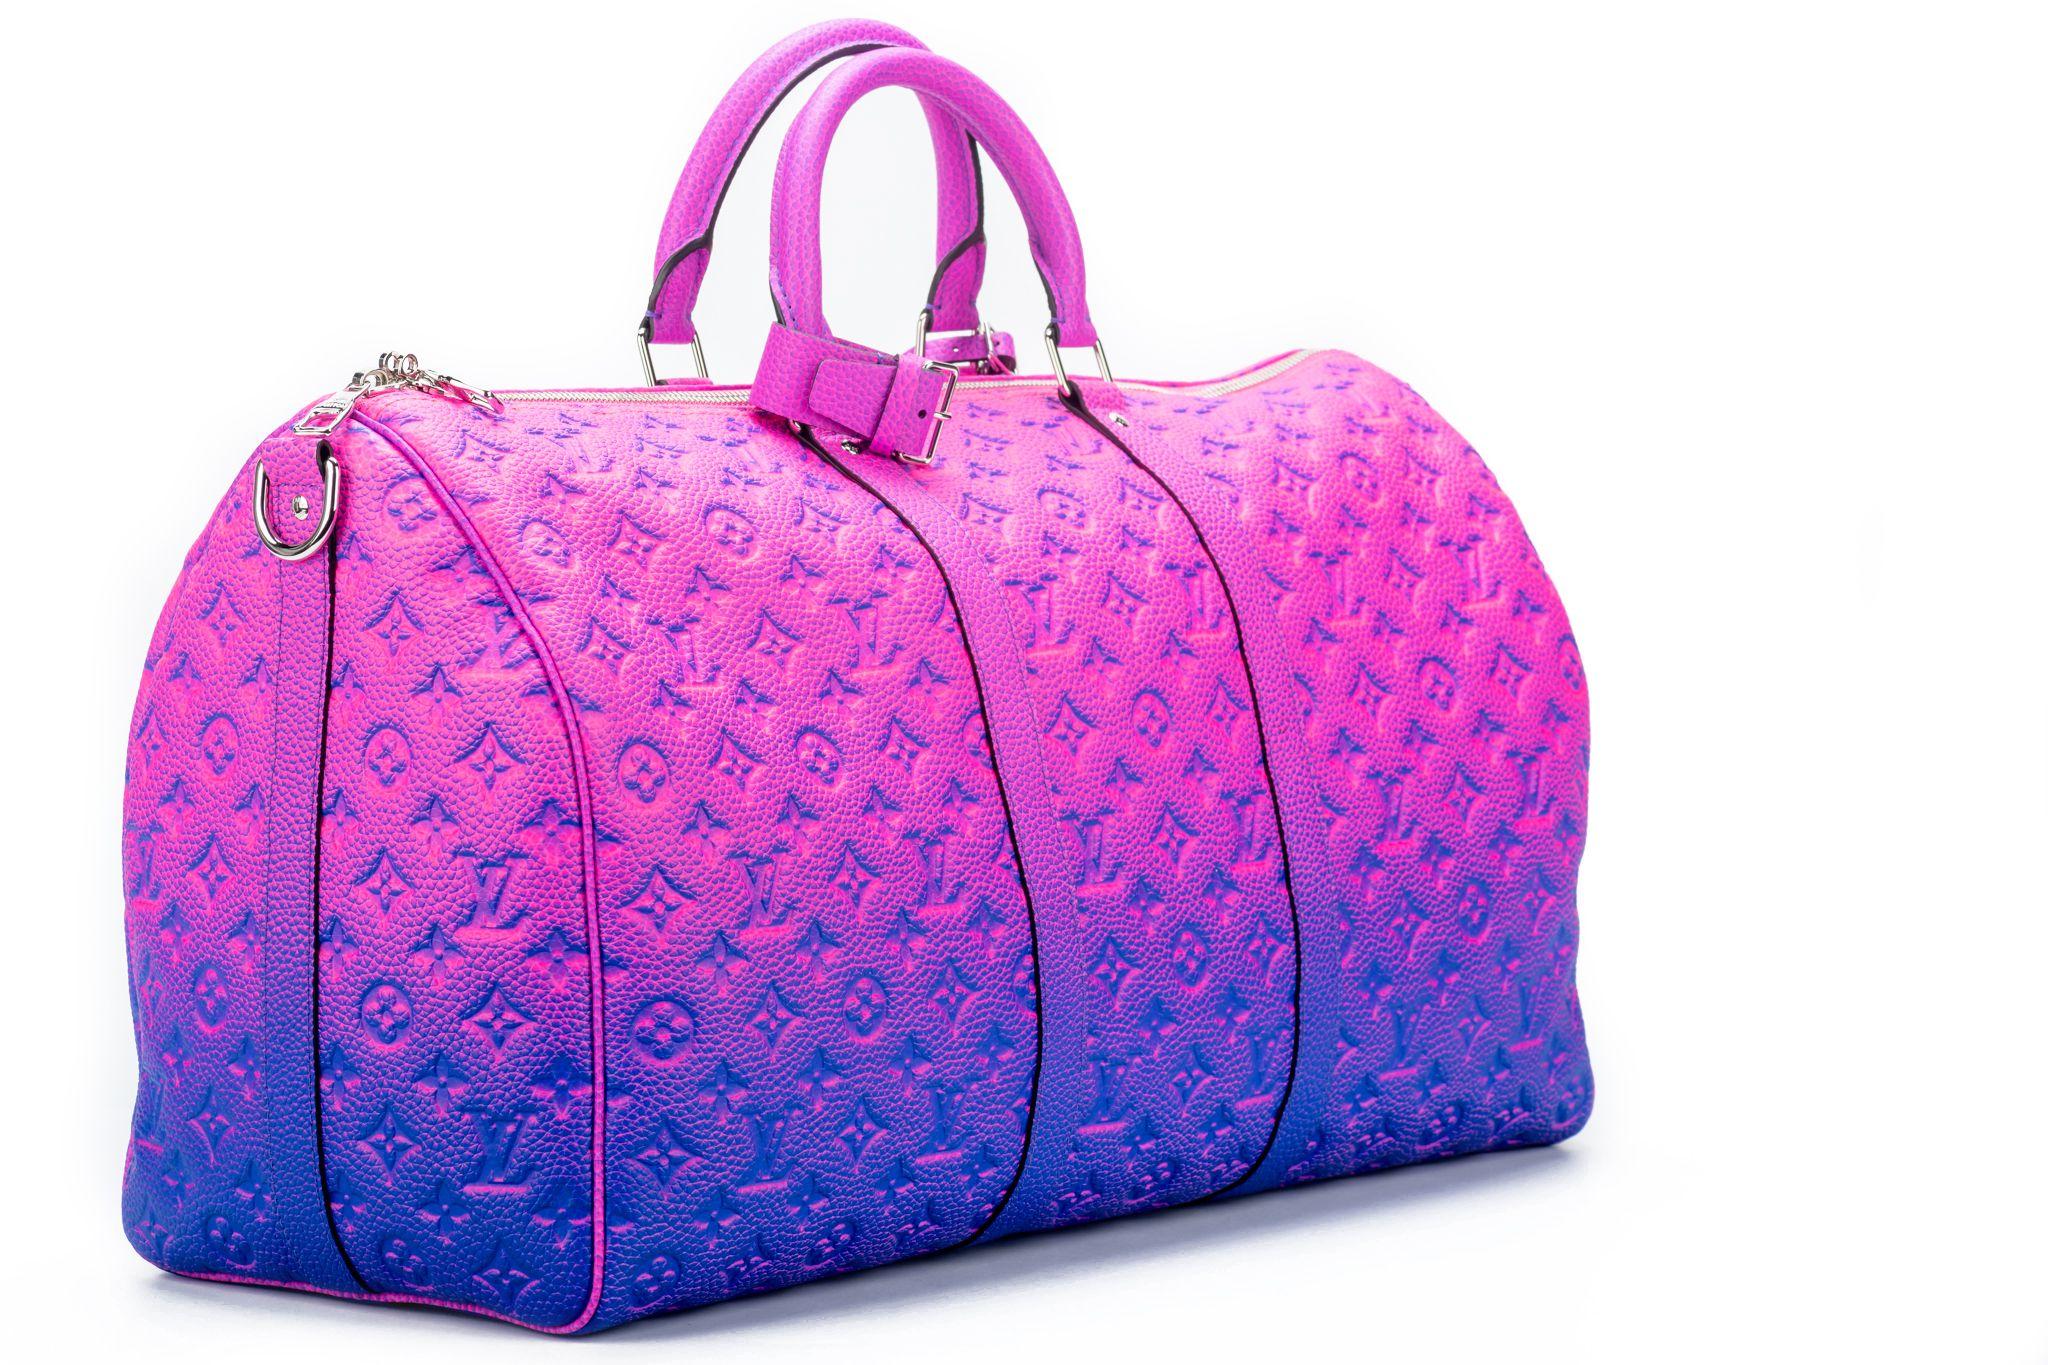 The Louis Vuitton Keepall 50 Bandouliere is made from bull calfskin with a soft multicolored pink. This bag is from the Virgil Abloh Illusion leather collection. Soft side and cabin-friendly, the Keepall 50 bag merits it’s name: the unexpectedly